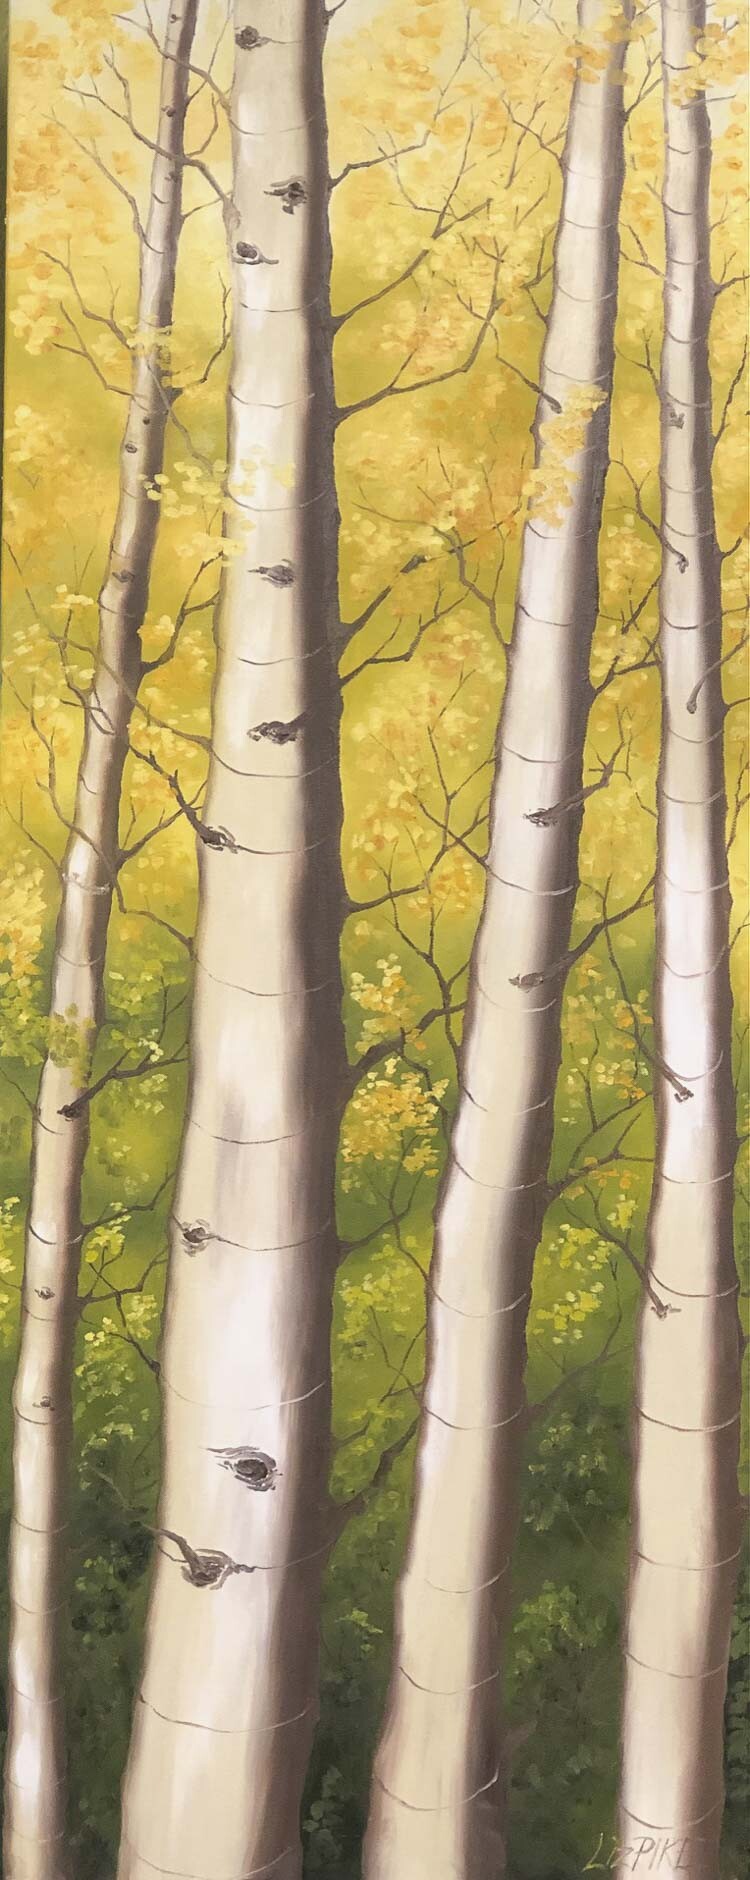 “Last Leaves” by Liz Pike. Photo courtesy Pike Art Gallery